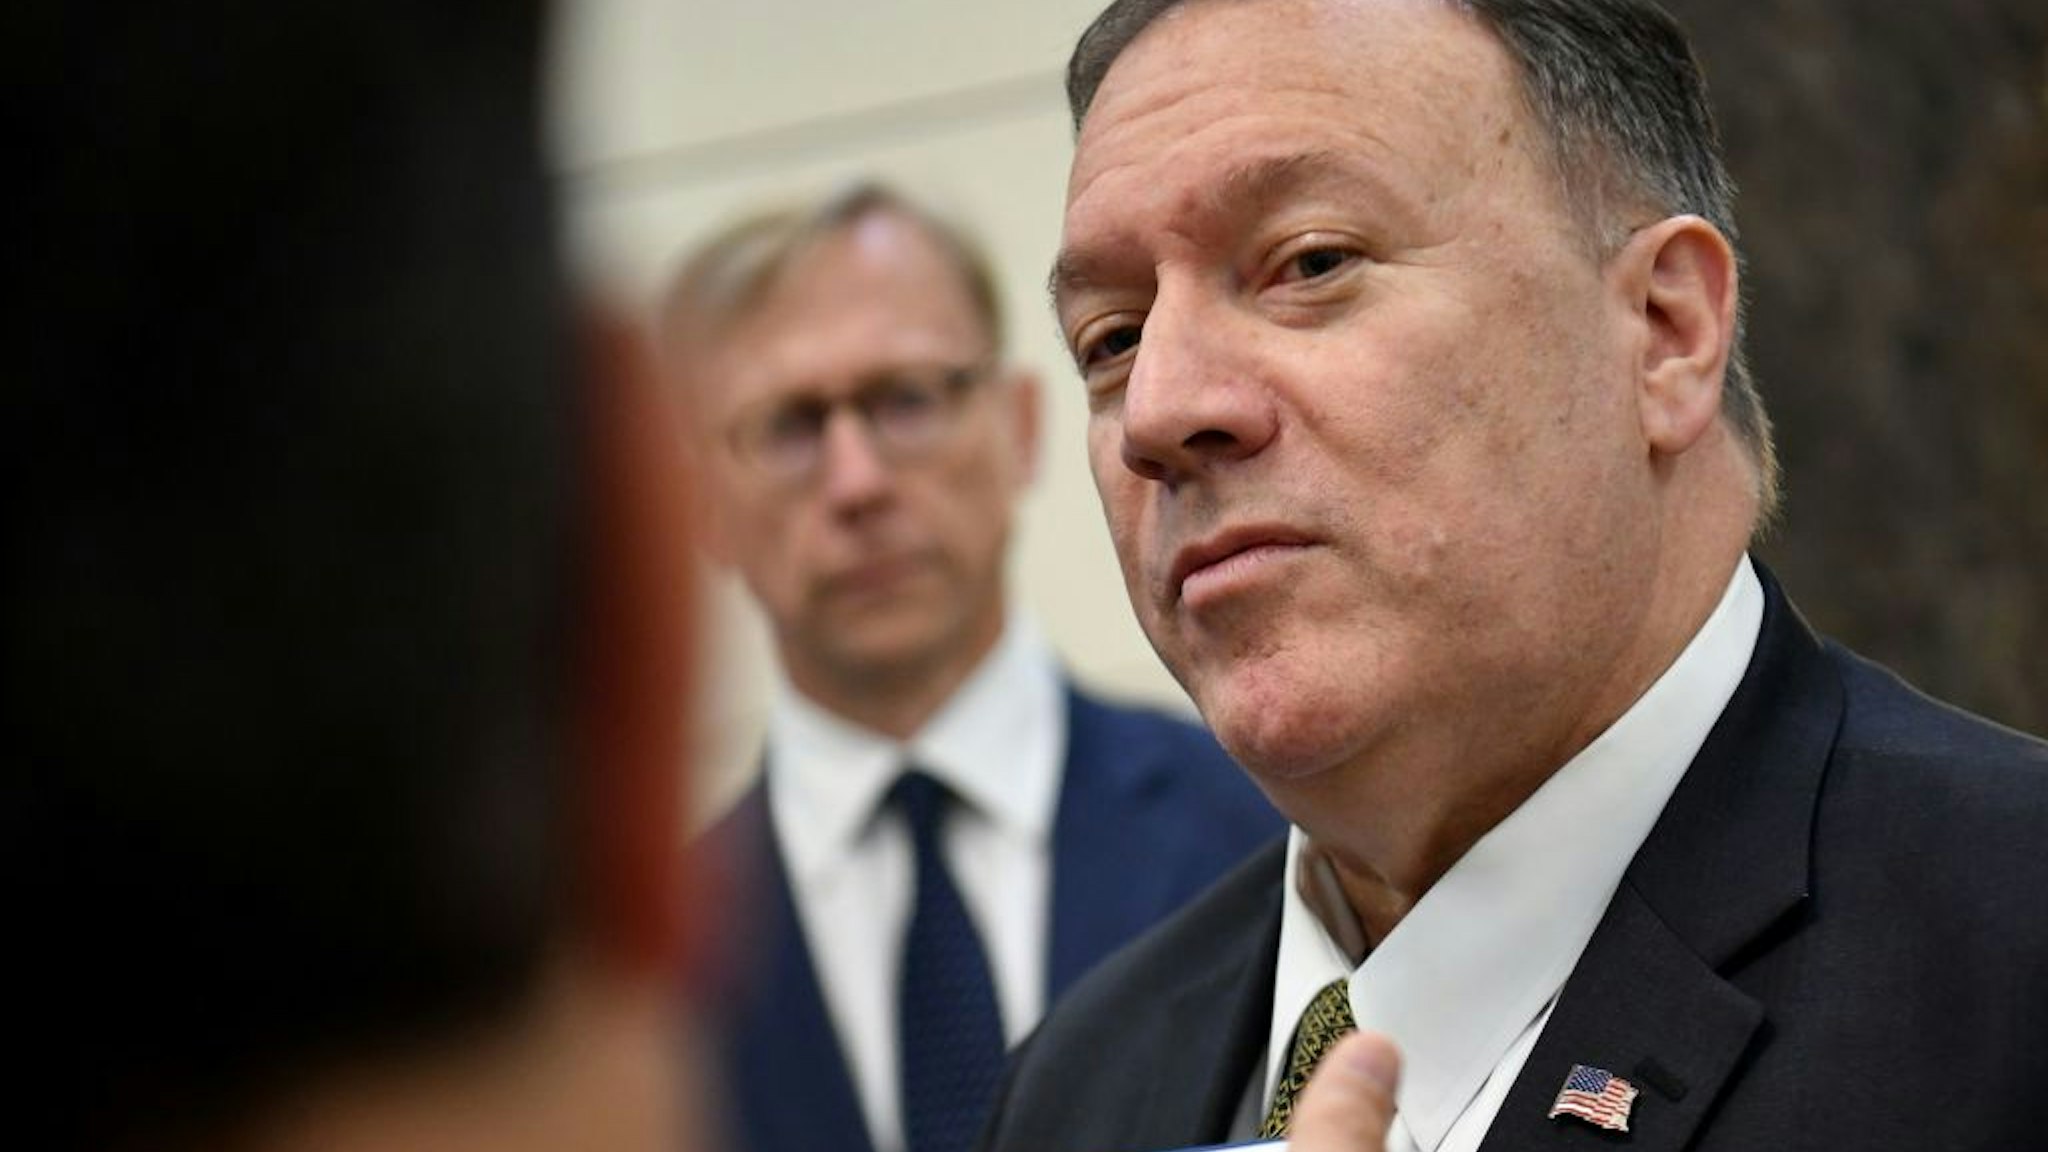 US Secretary of State Mike Pompeo speaks to reporters before departing from al-Bateen Air Base in Abu Dhabi on September 19, 2019.